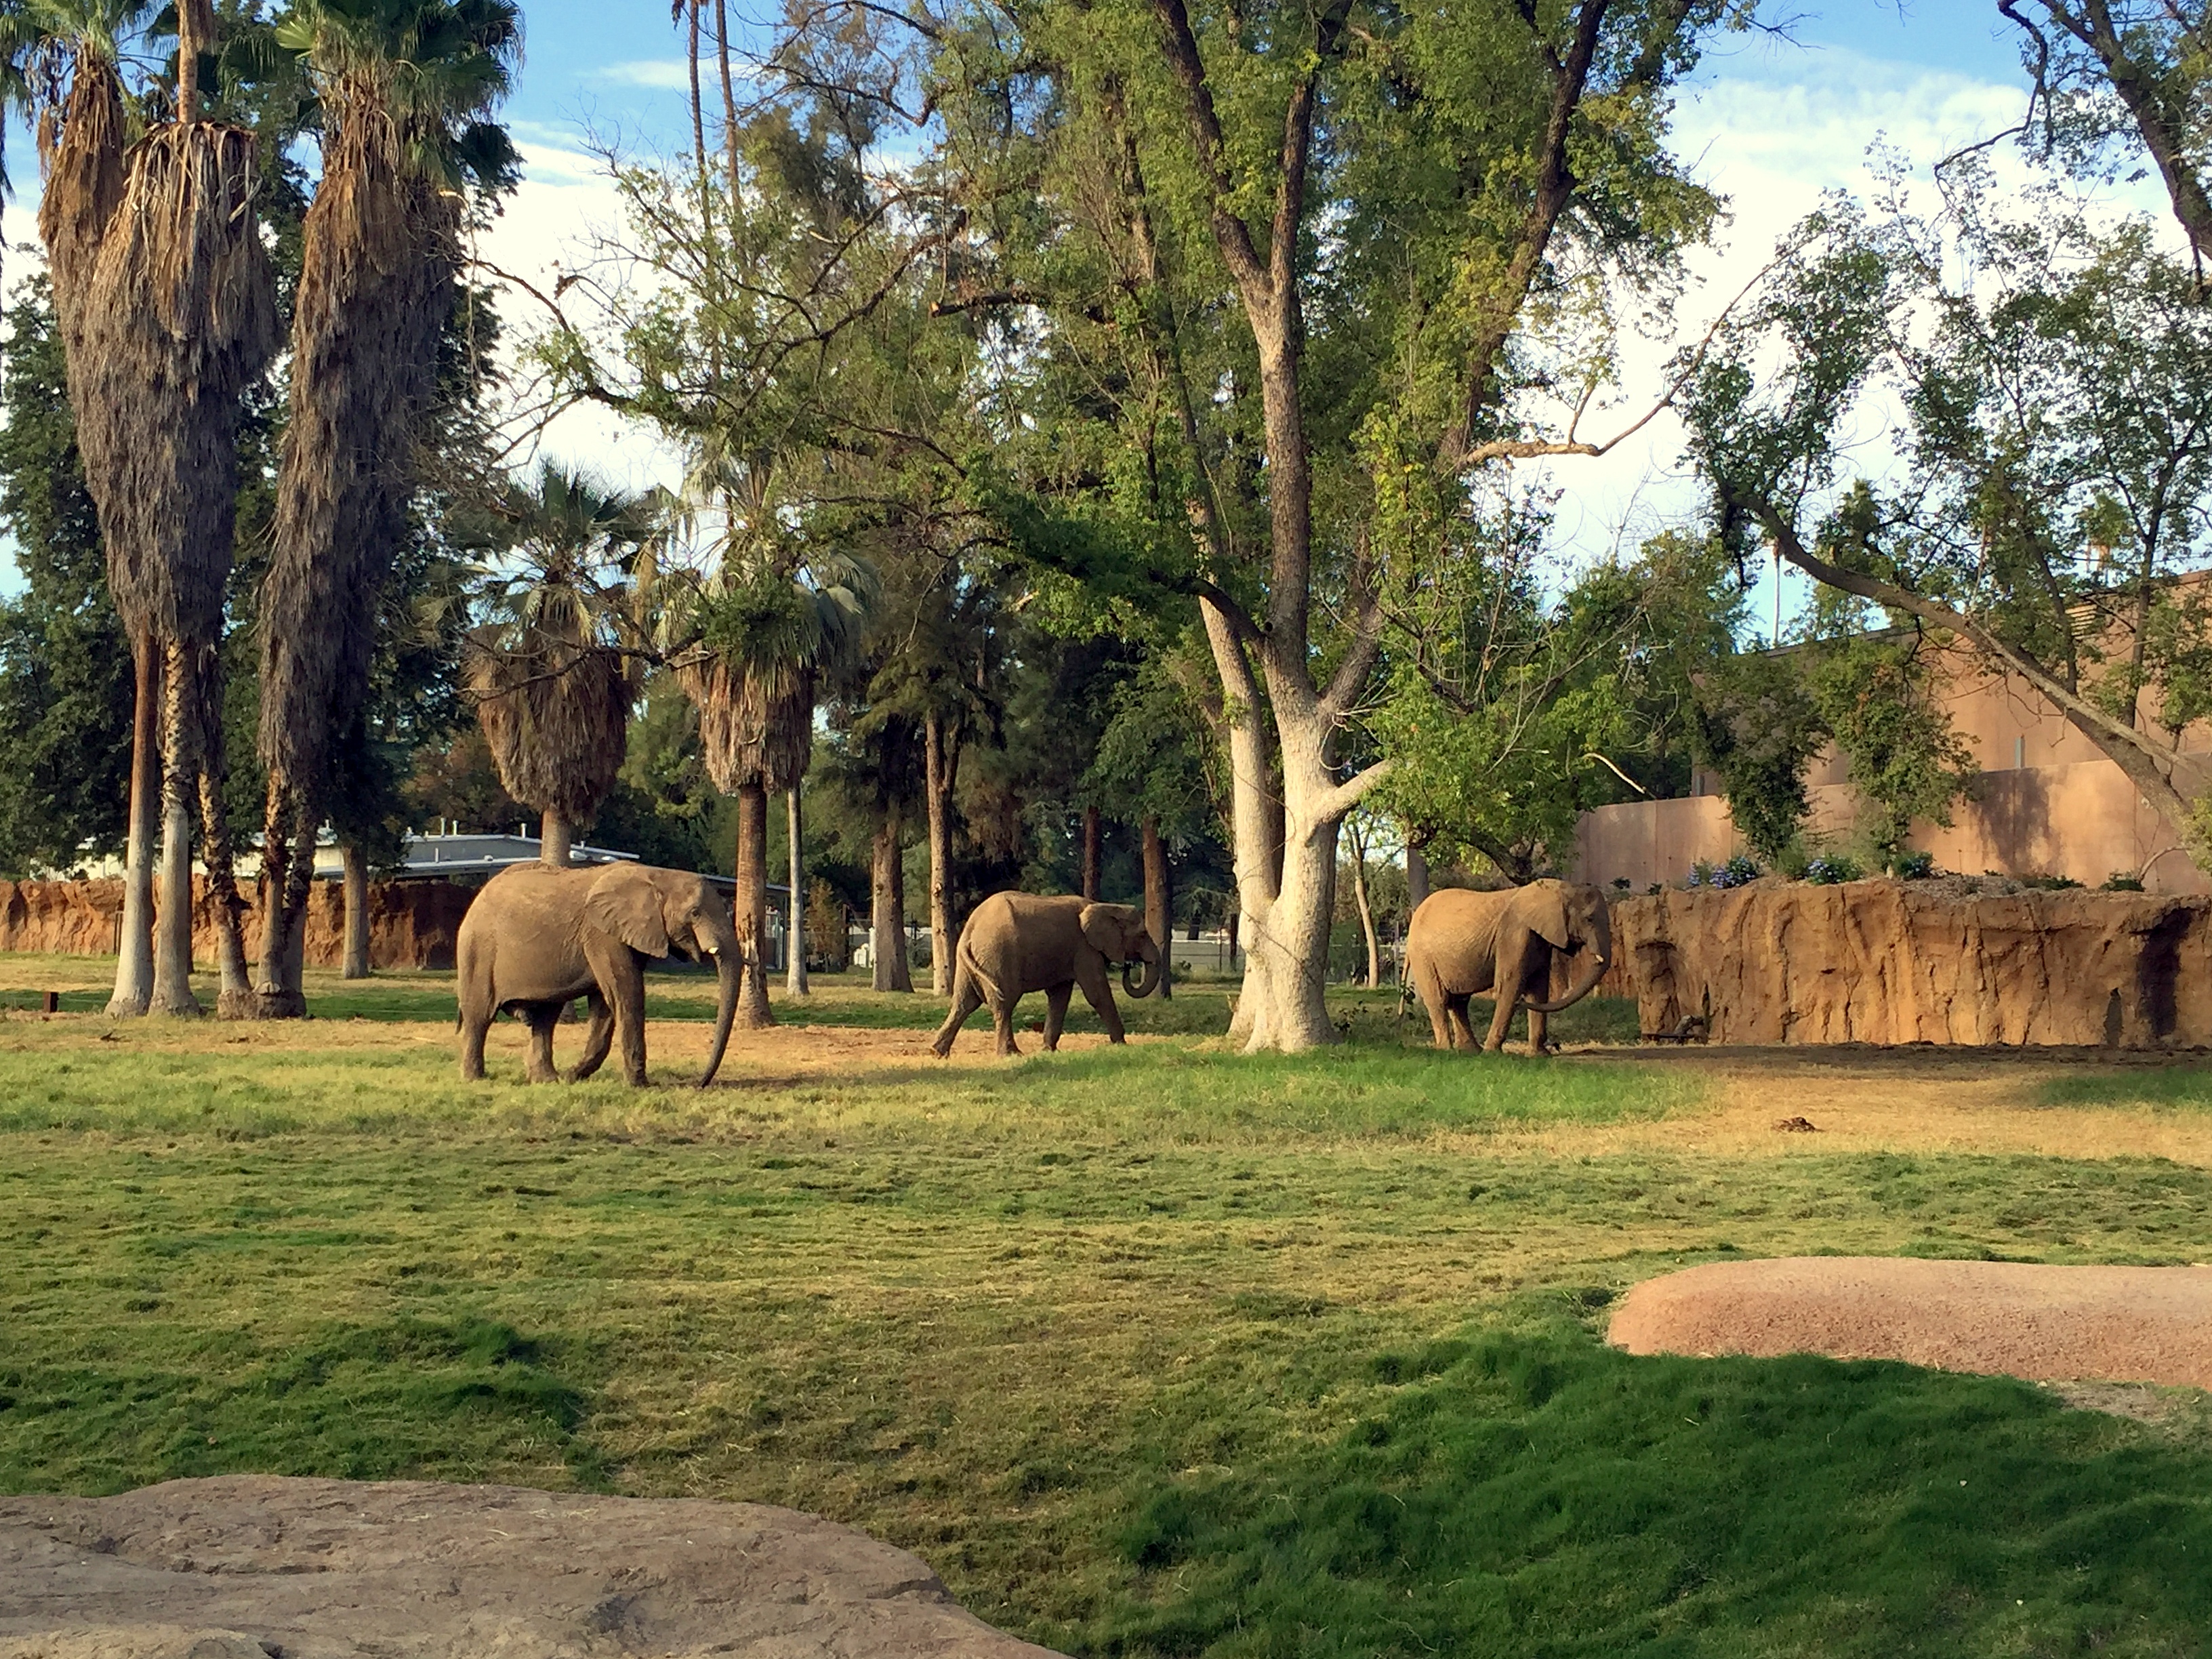 Oh hey you three awesome African elephants, just milling peacefully about! Looking good.